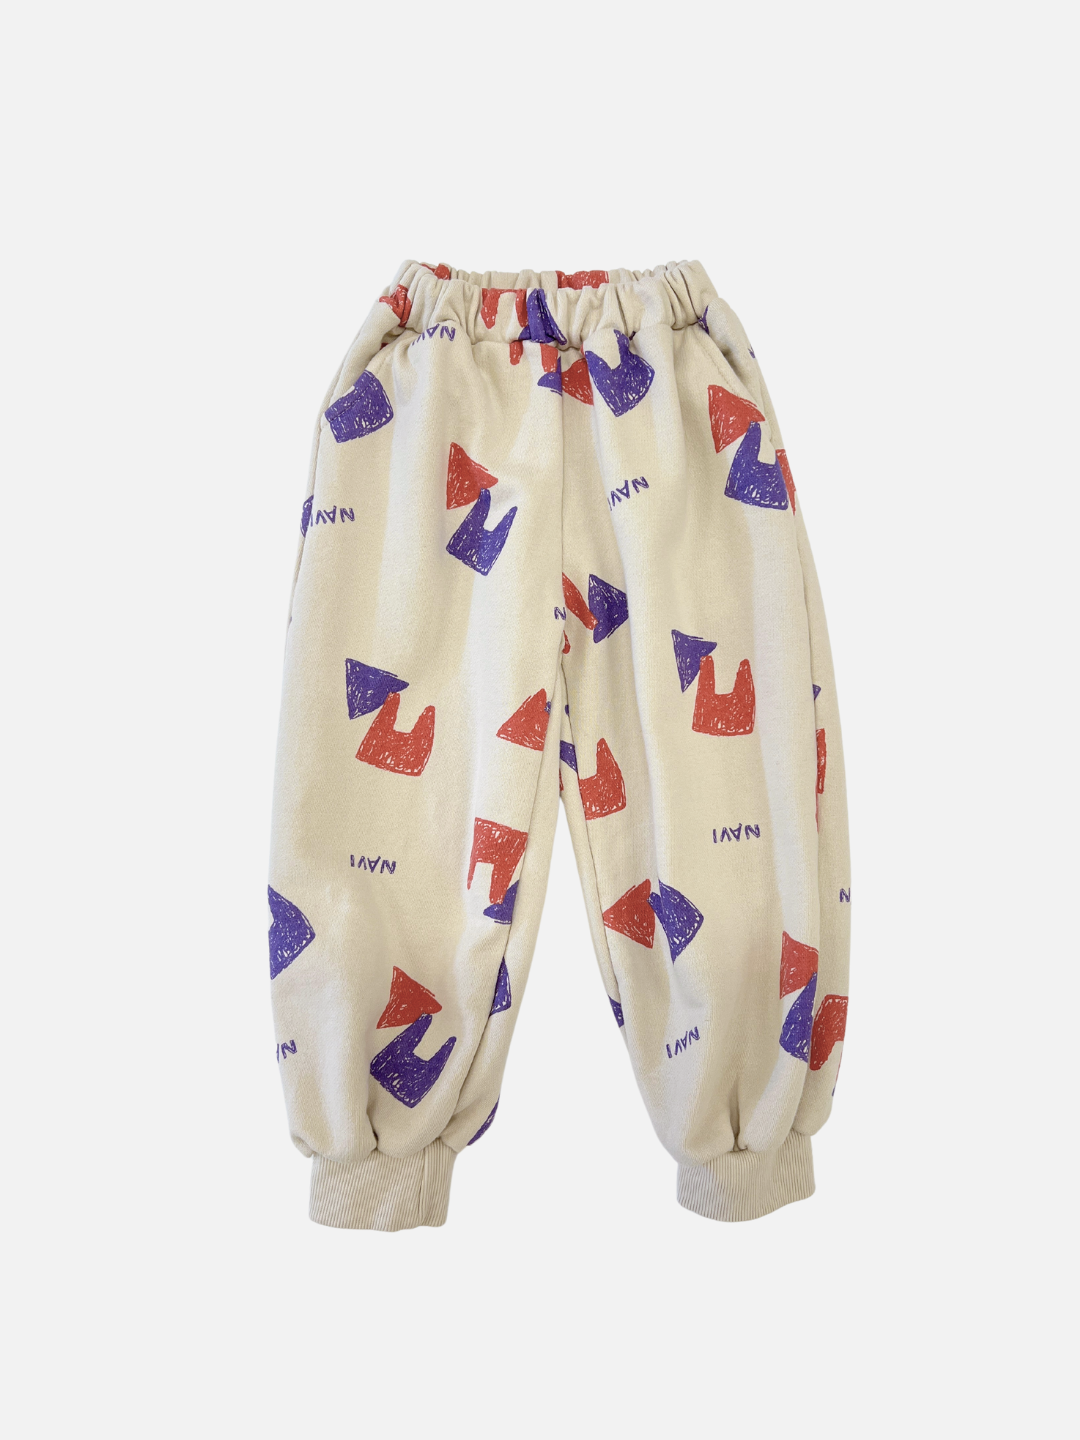 Front view of kids beige sweatpants with an all over pattern of red and purple shapes and the brand name Navi.